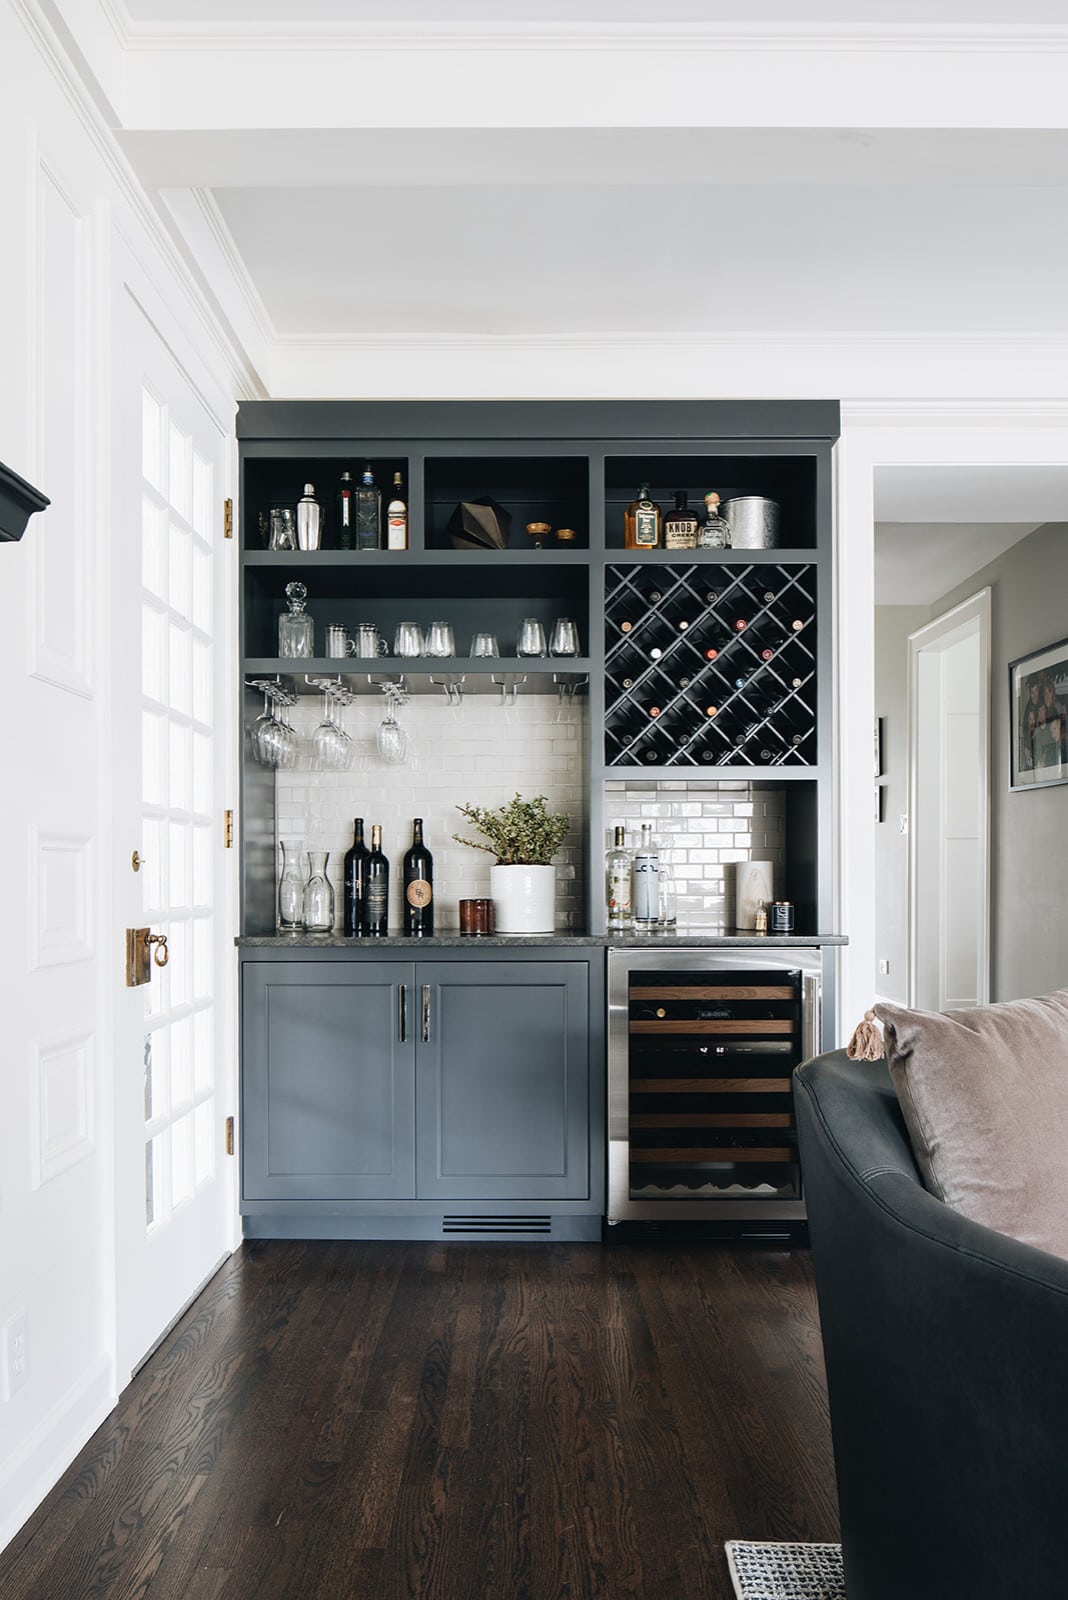 Home tour featuring family room with a wine bar in dark blue